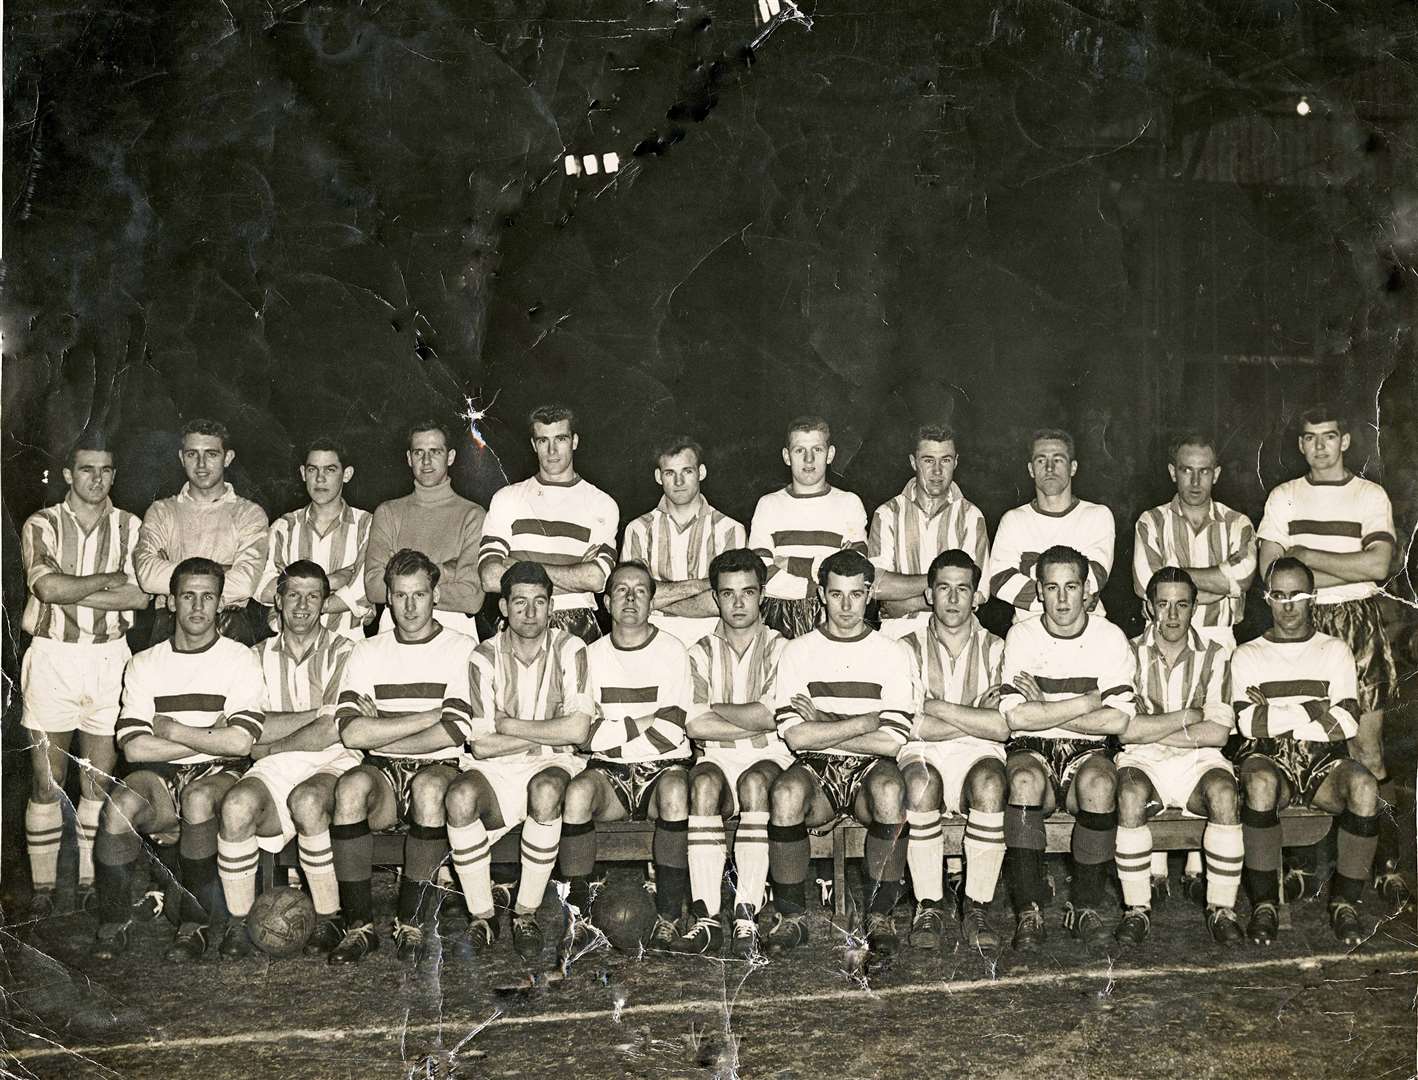 The 1959 line-up to mark the installation of floodlighting at Caledonian;s ground. Back row – Ballantyne (Caley), Beattie (Celtic), Mackintosh (Caley), Jim Lornie (Caley), Paterson (Rangers), McGillvray (Caley), Kennedy (Celtic), Christie (Caley), Millar (Rangers), McBeath (Caley), King (Rangers) Front: Crerand (Celtic), McKenzie (Caley), Baird (Rangers), Ingram (Caley), Tully (Celtic), Tulloch (Caley), Queen (Rangers), Clyne (Caley), Conway (Celtic), Munro (Caley), Hubbard (Rangers).